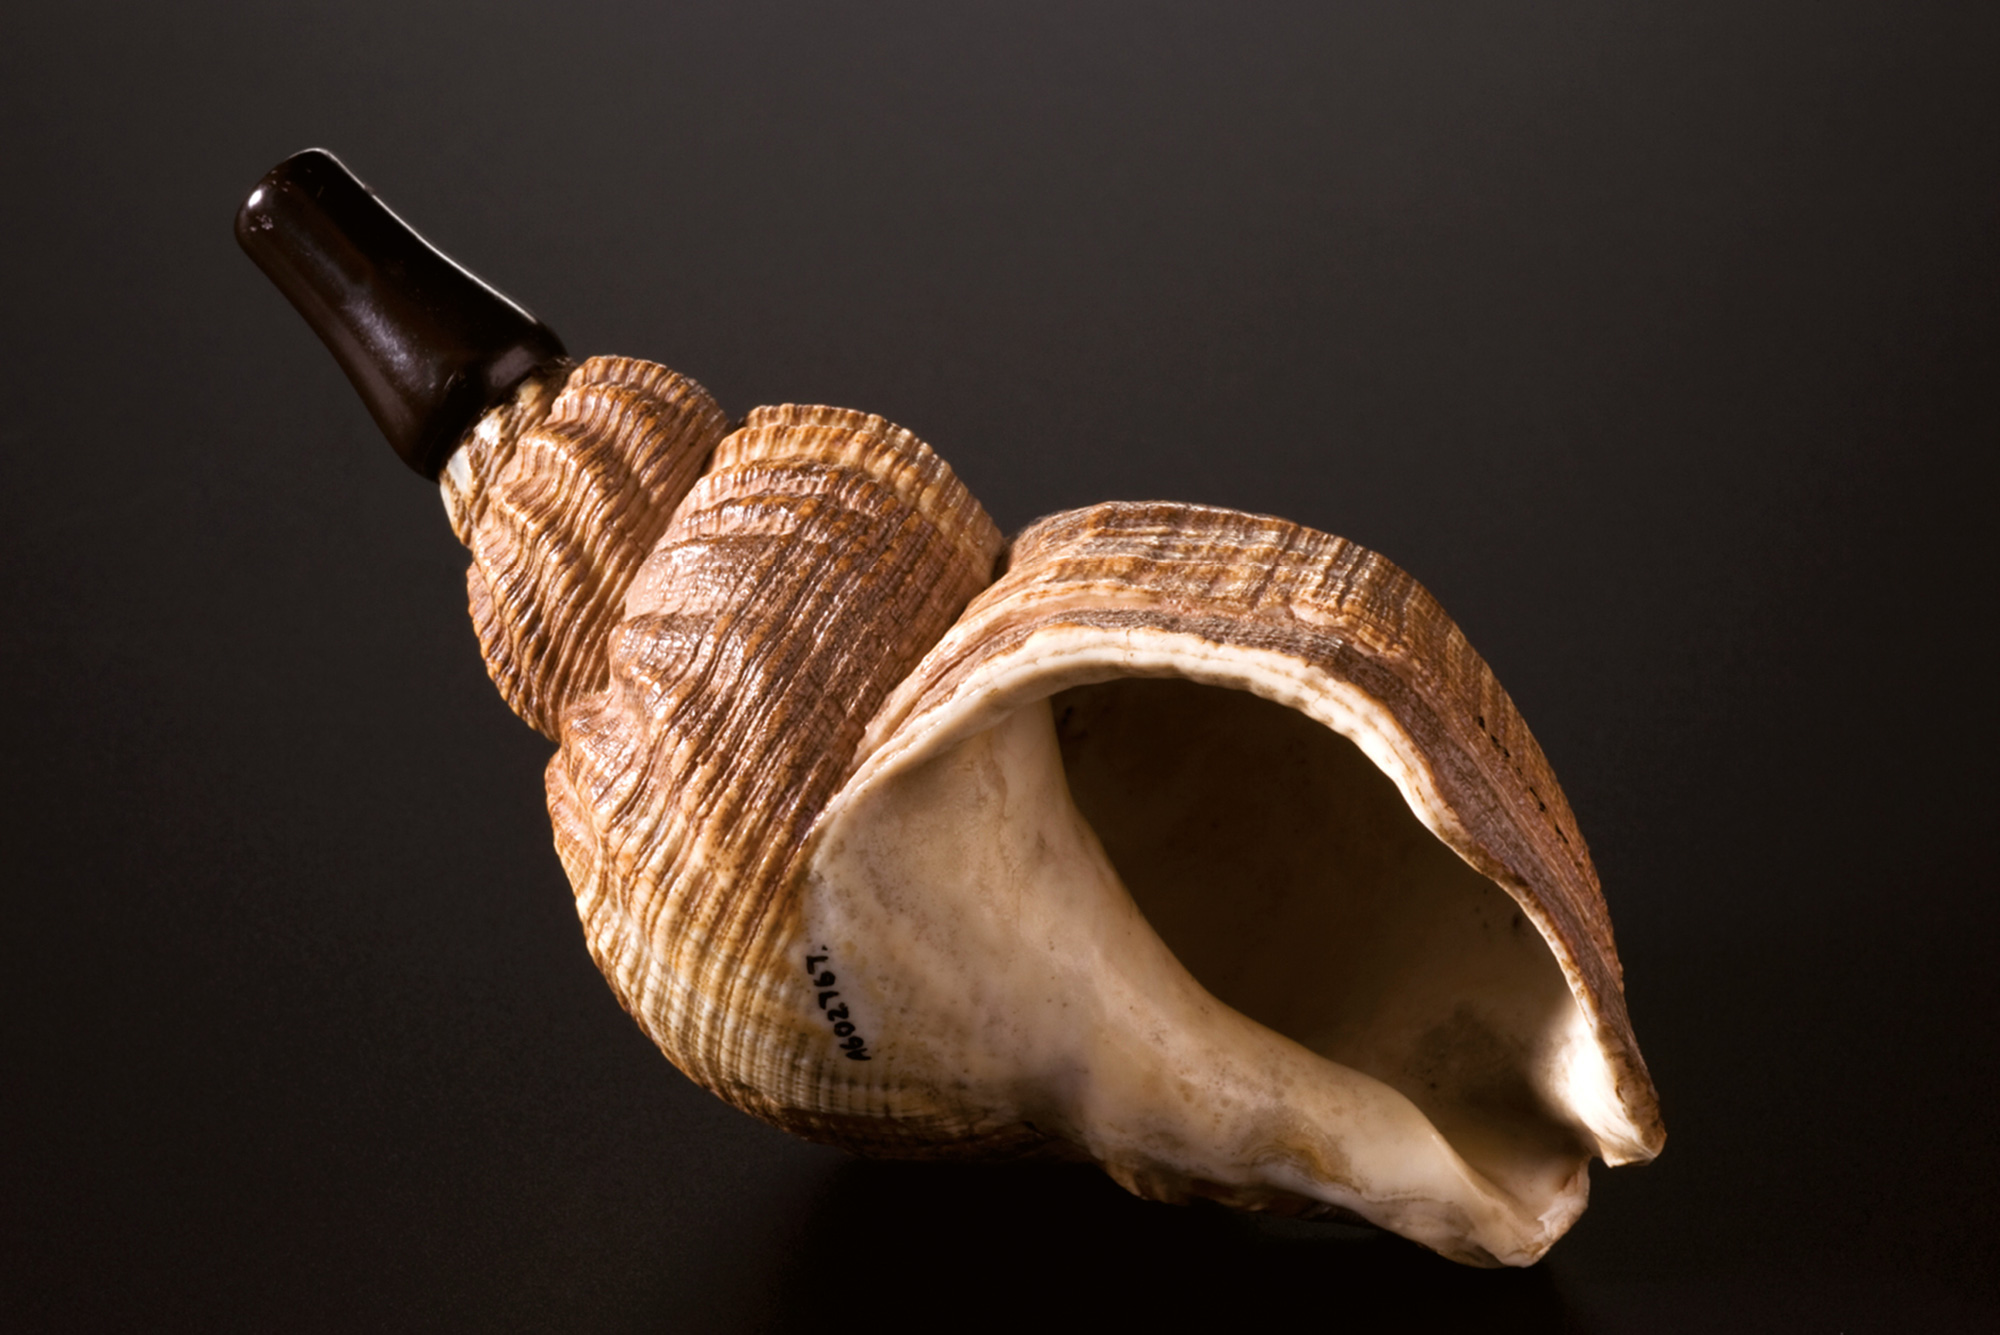 A photograph of an ear trumpet made from a whelk shell.